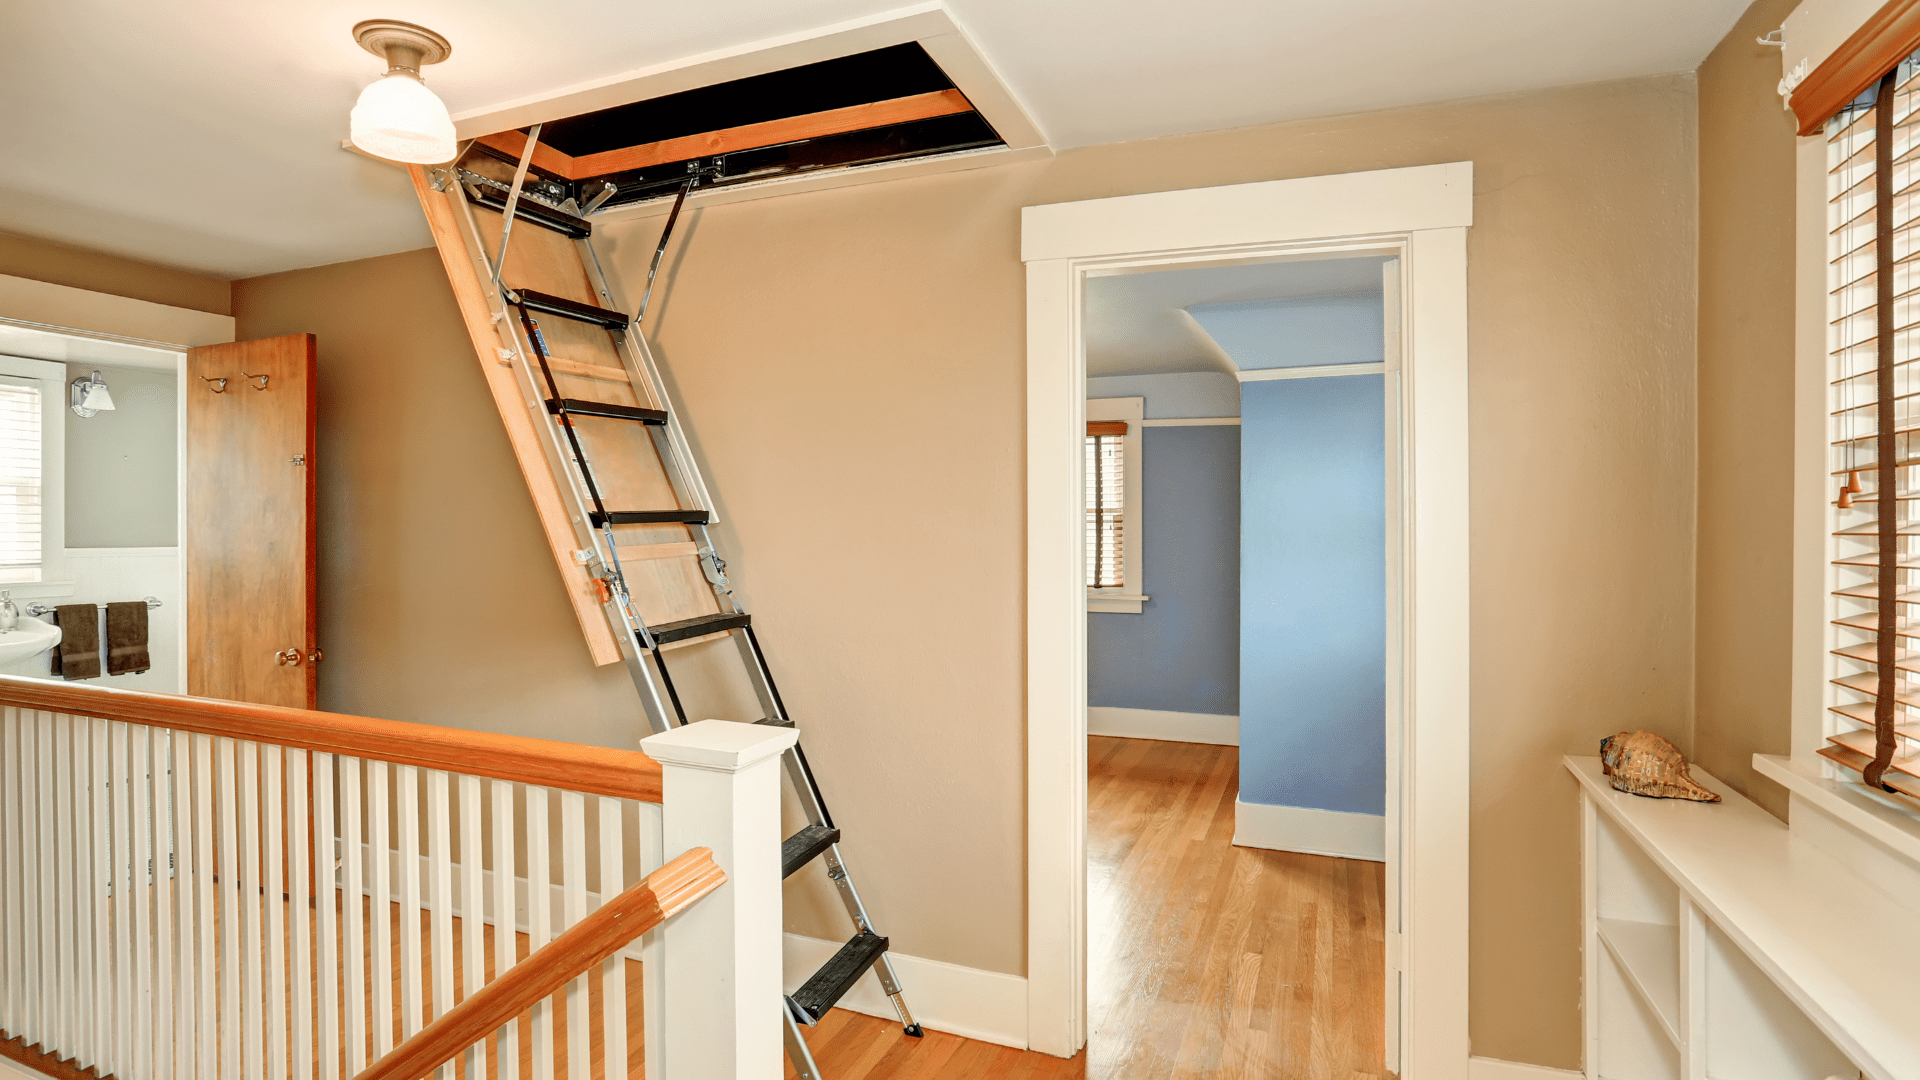 How To Remodel An Attic Into A Room